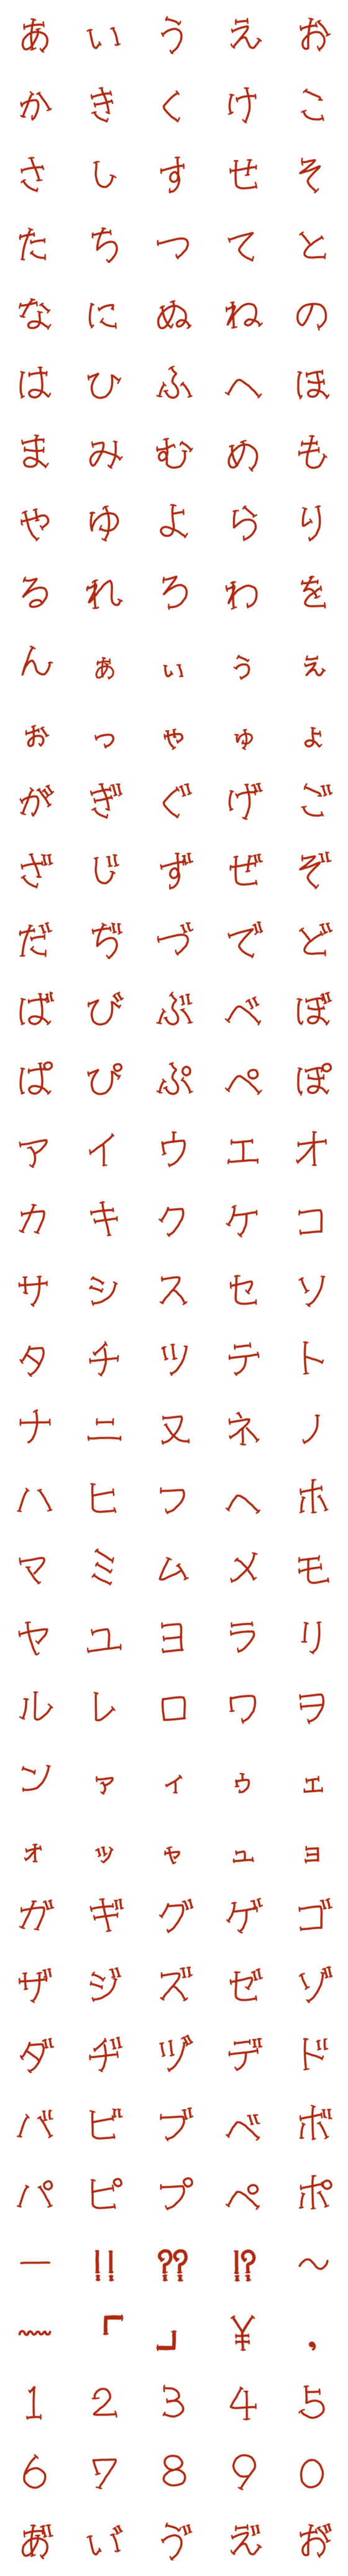 [LINE絵文字]赤い文字(ひらがな・カタカナ・数字)の画像一覧